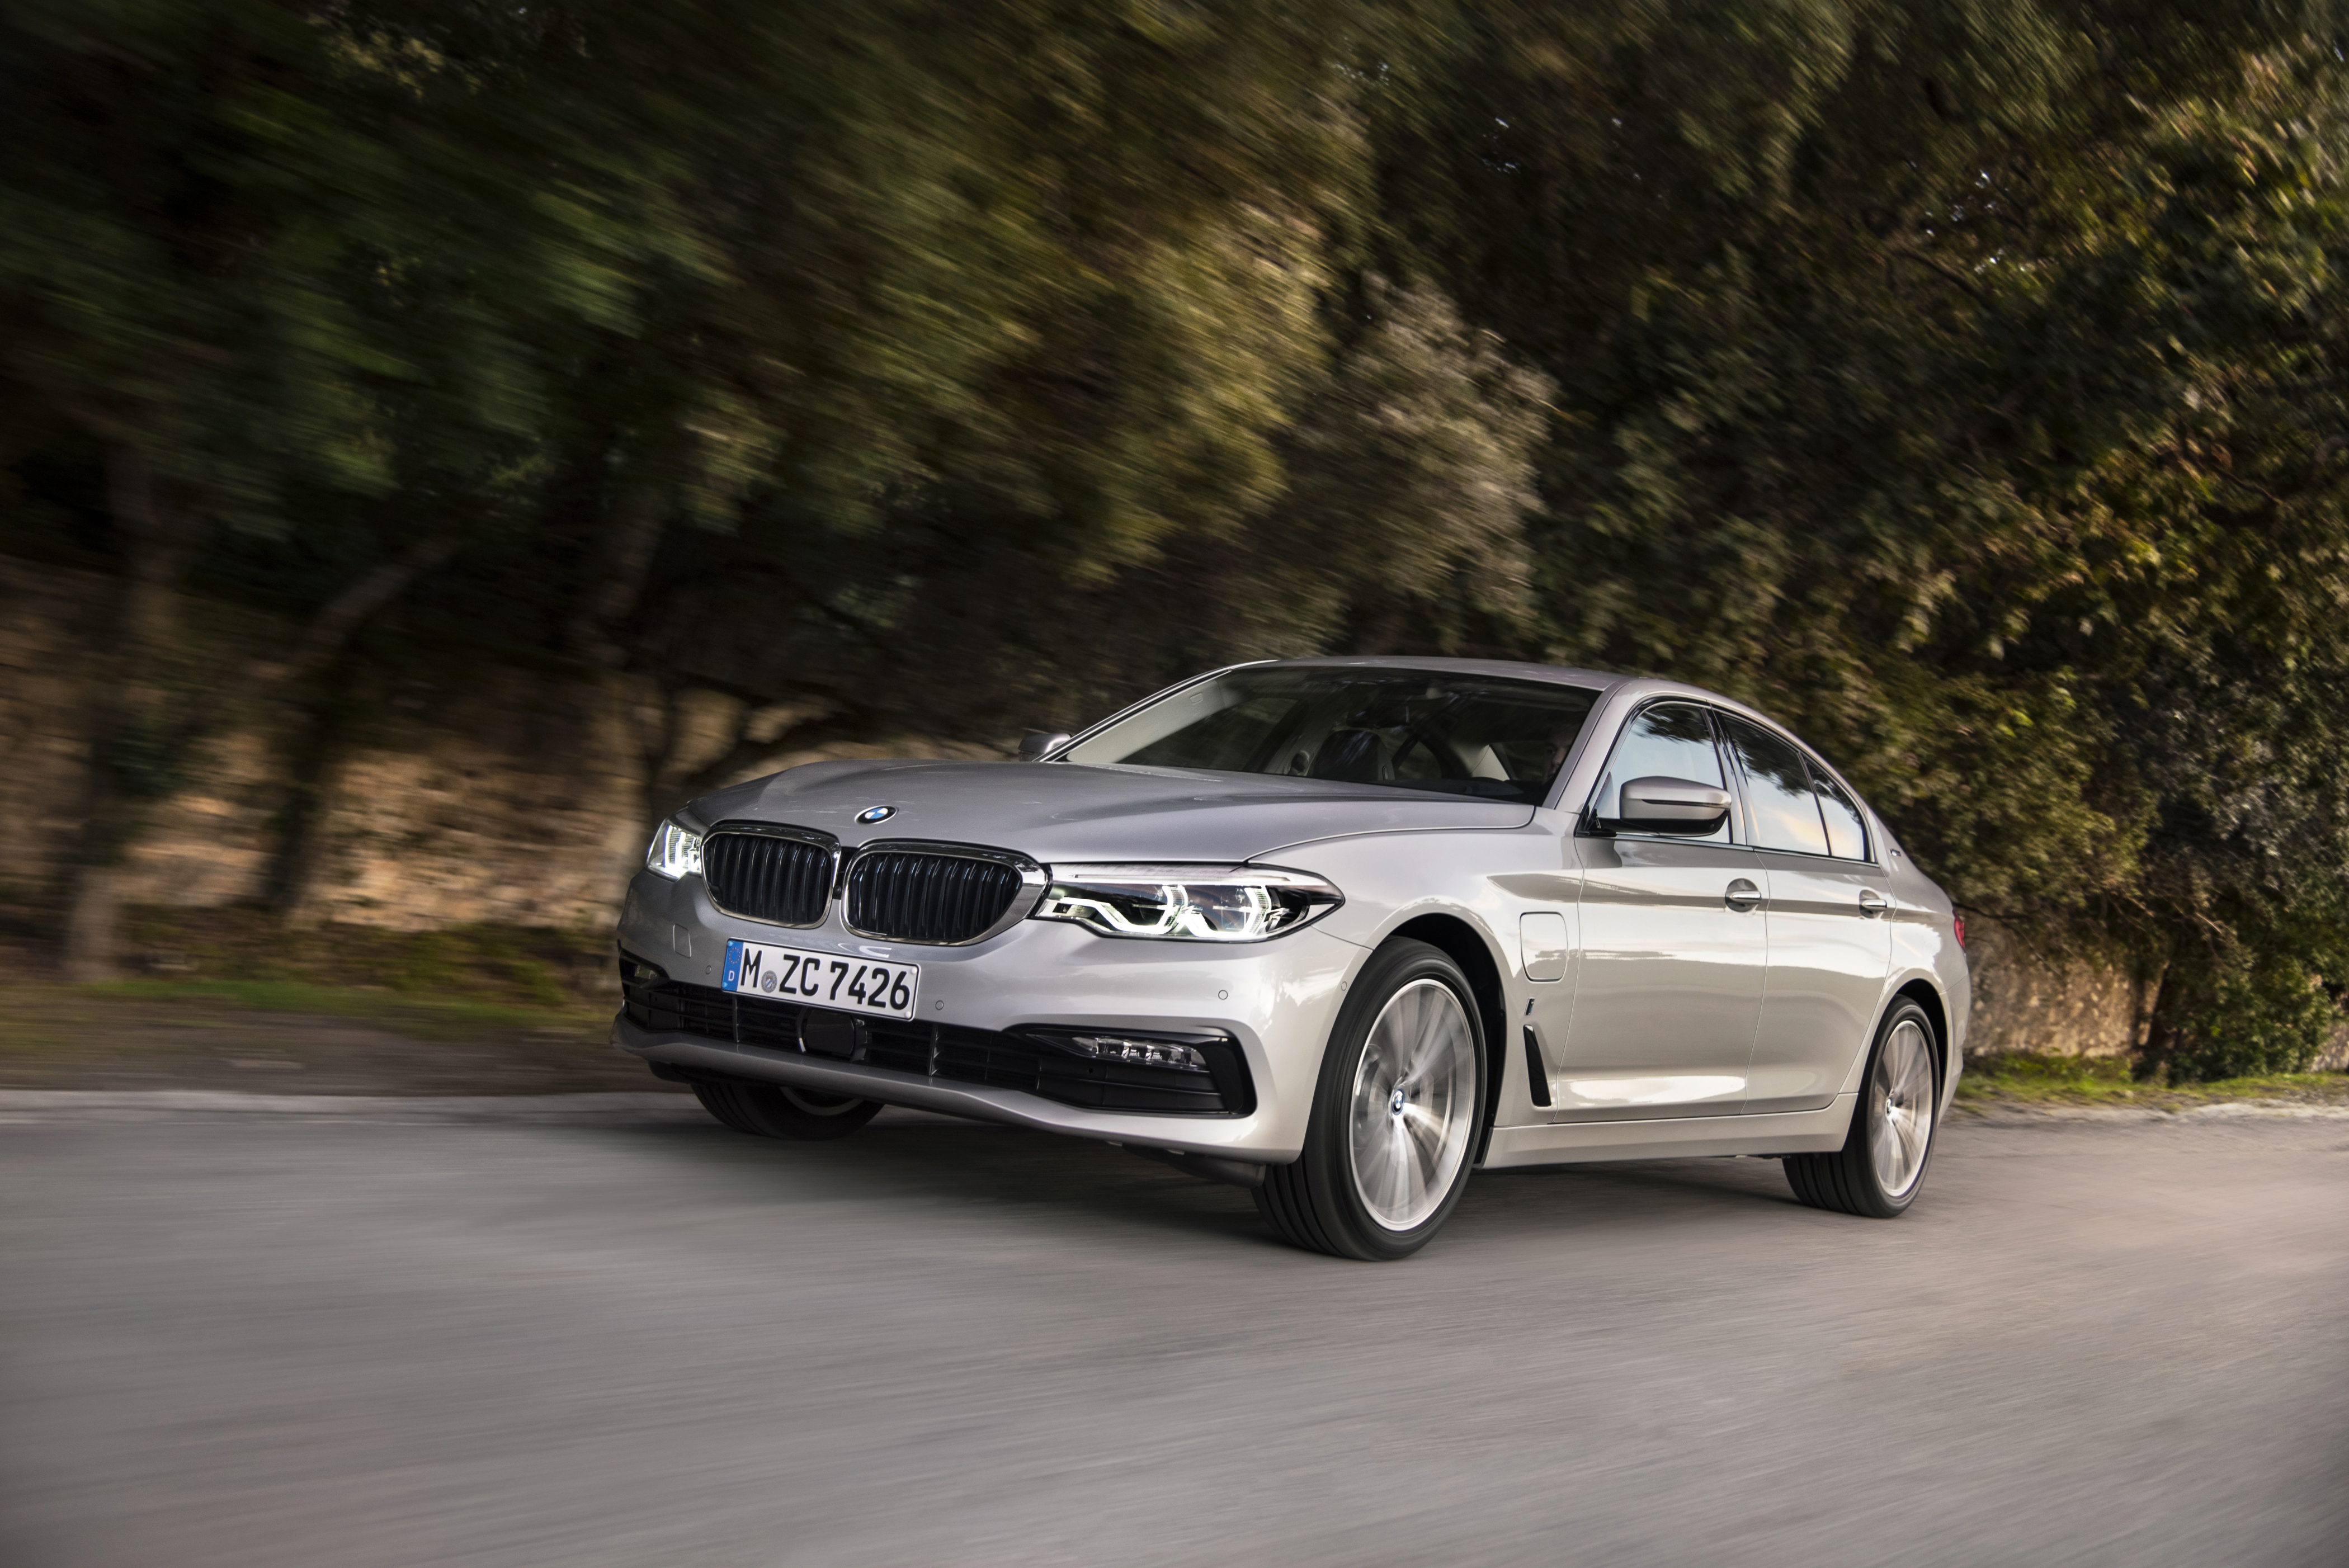 2018 BMW 530e xDrive: 30 Extra MPG for $1200 [Video] - The Fast Lane Car